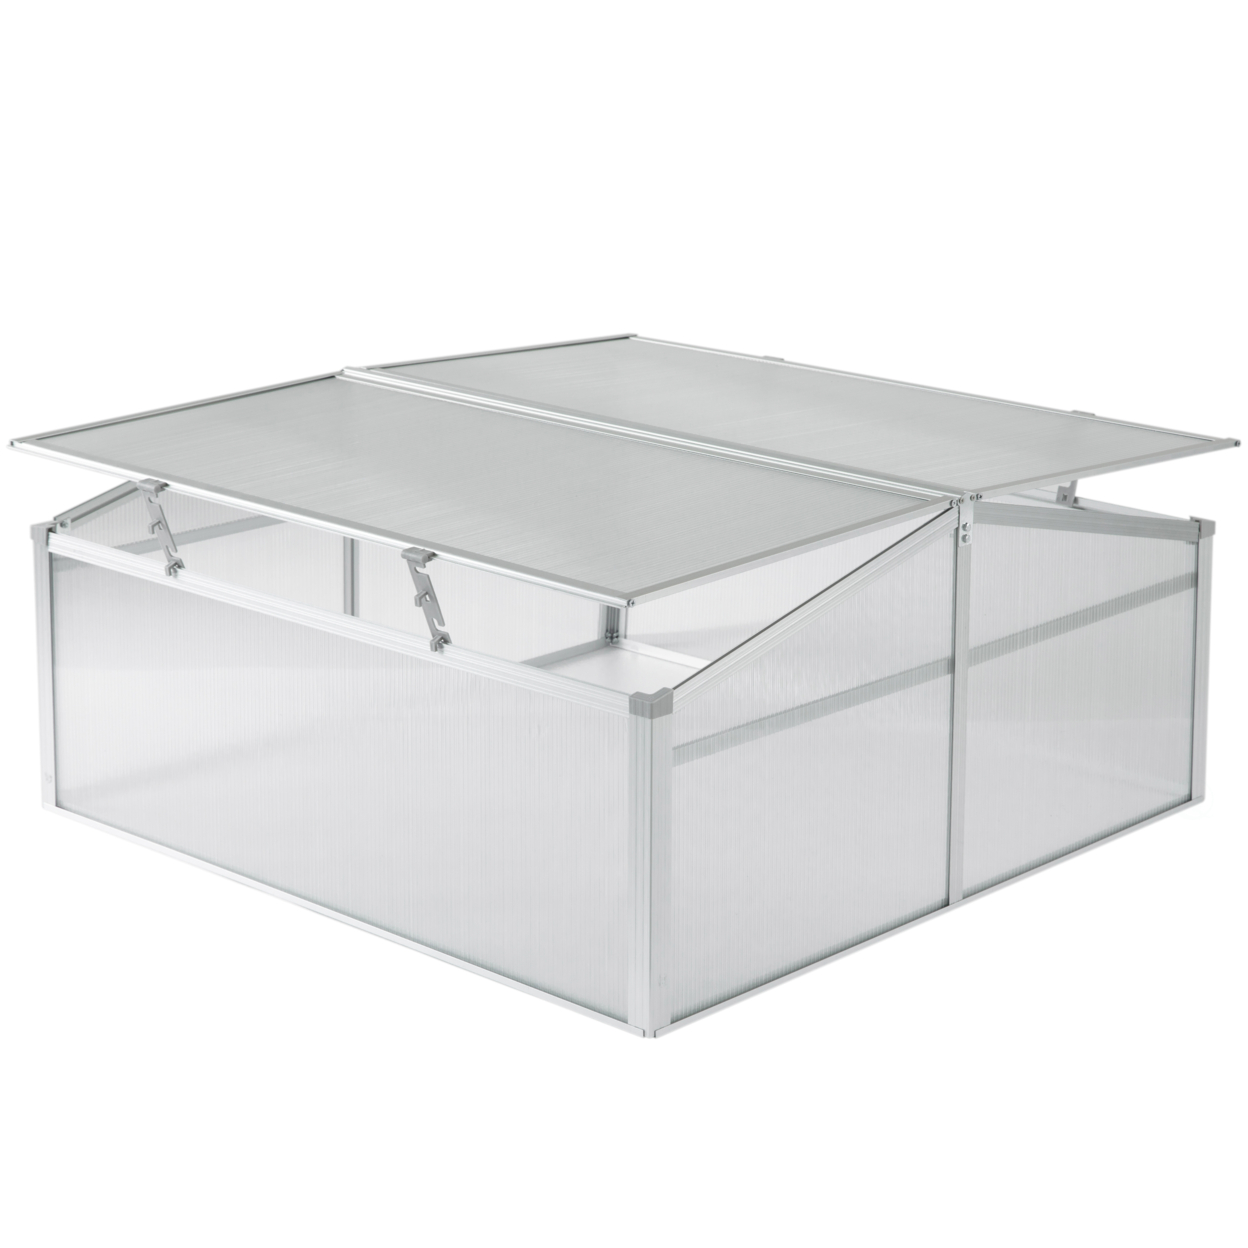 Aluminum Cold Frame Portable Greenhouse Bottomless Flower Box, Plant Protector, Transparent Double Walled PVC Panels Blocks Harmful UV Rays